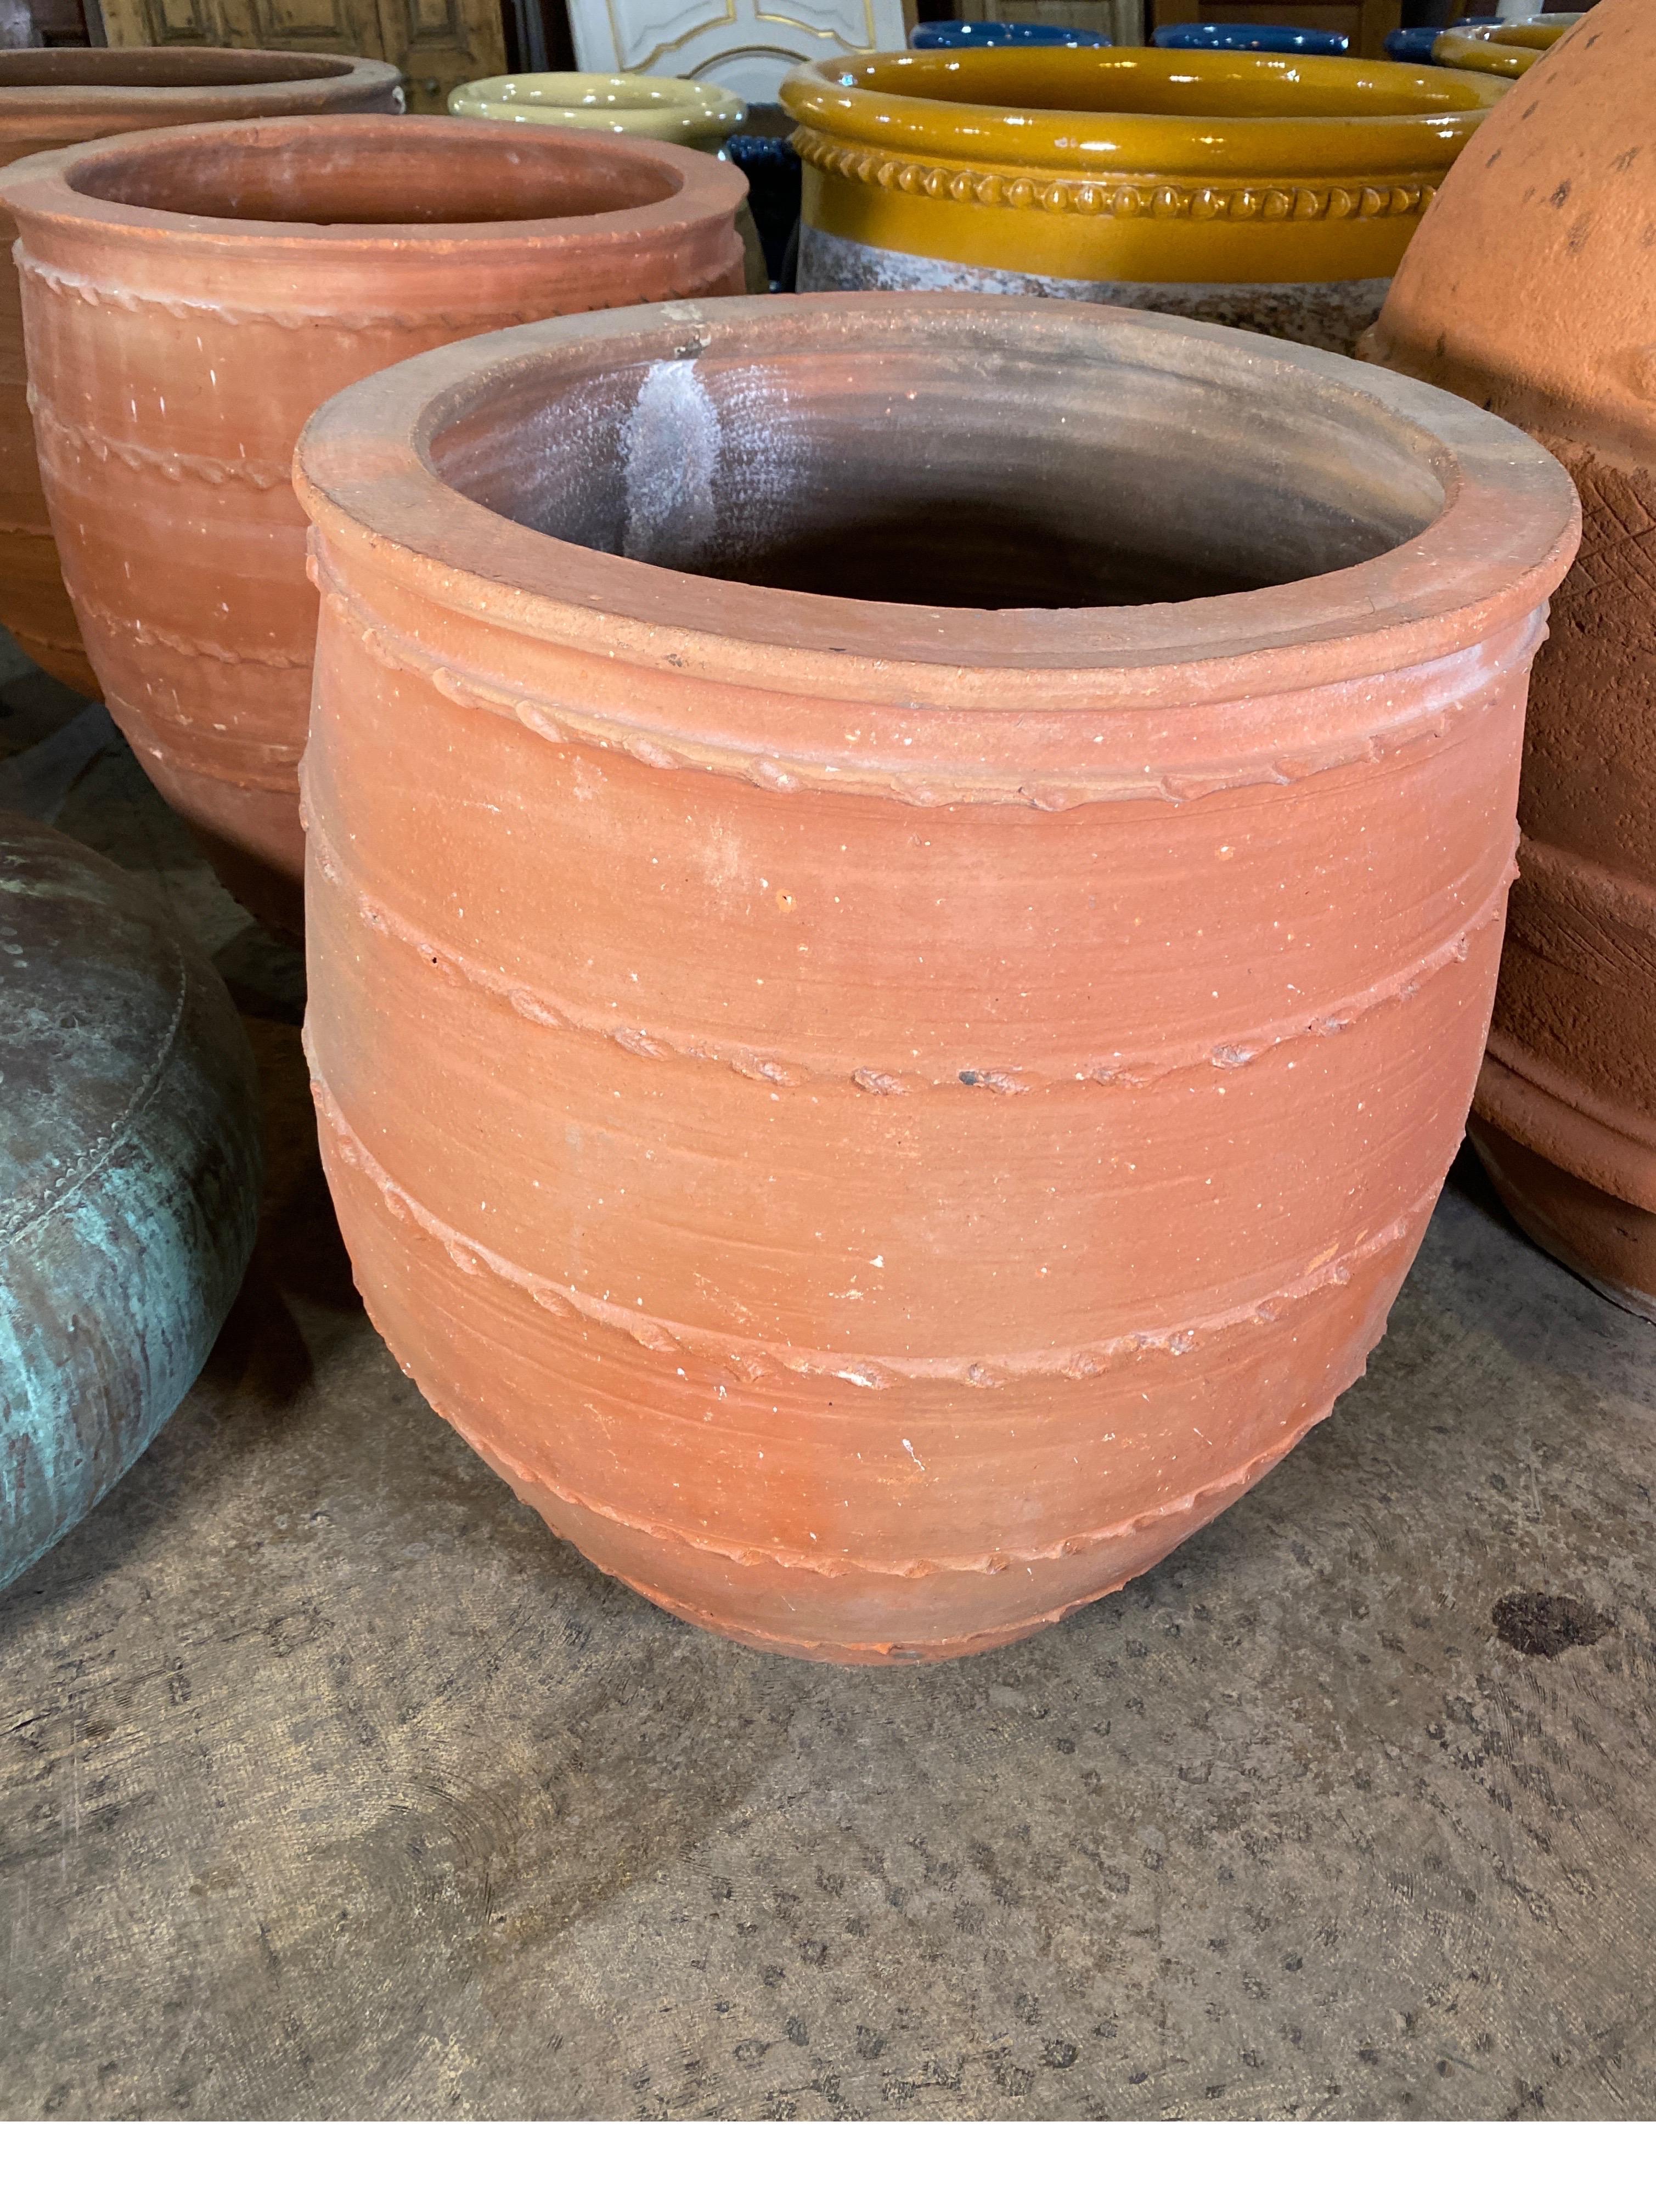 Terra cotta urn handcrafted in France.